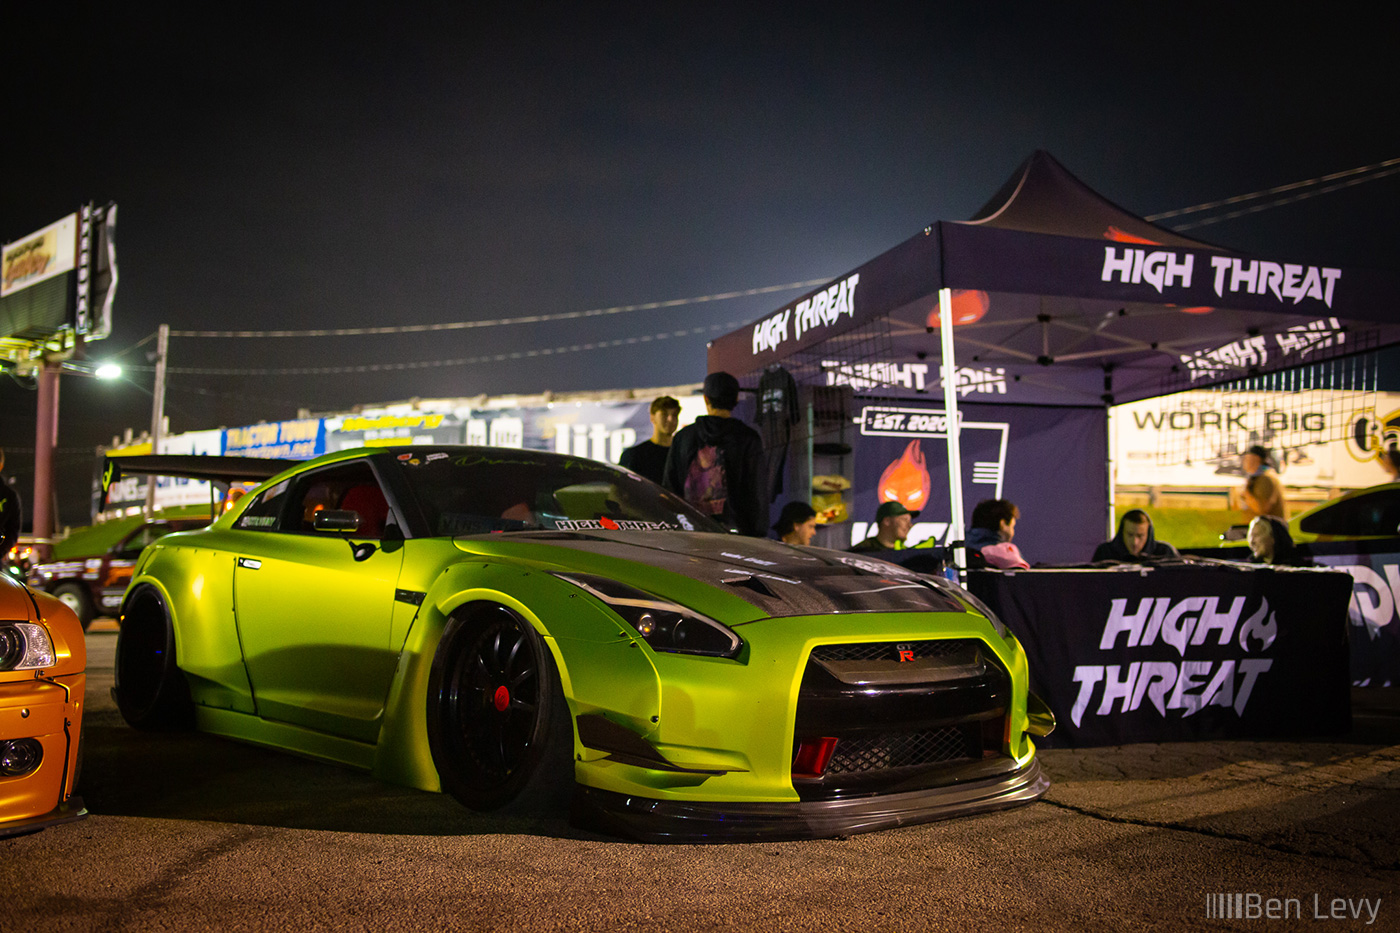 Green Nissan GT-R with High Threat